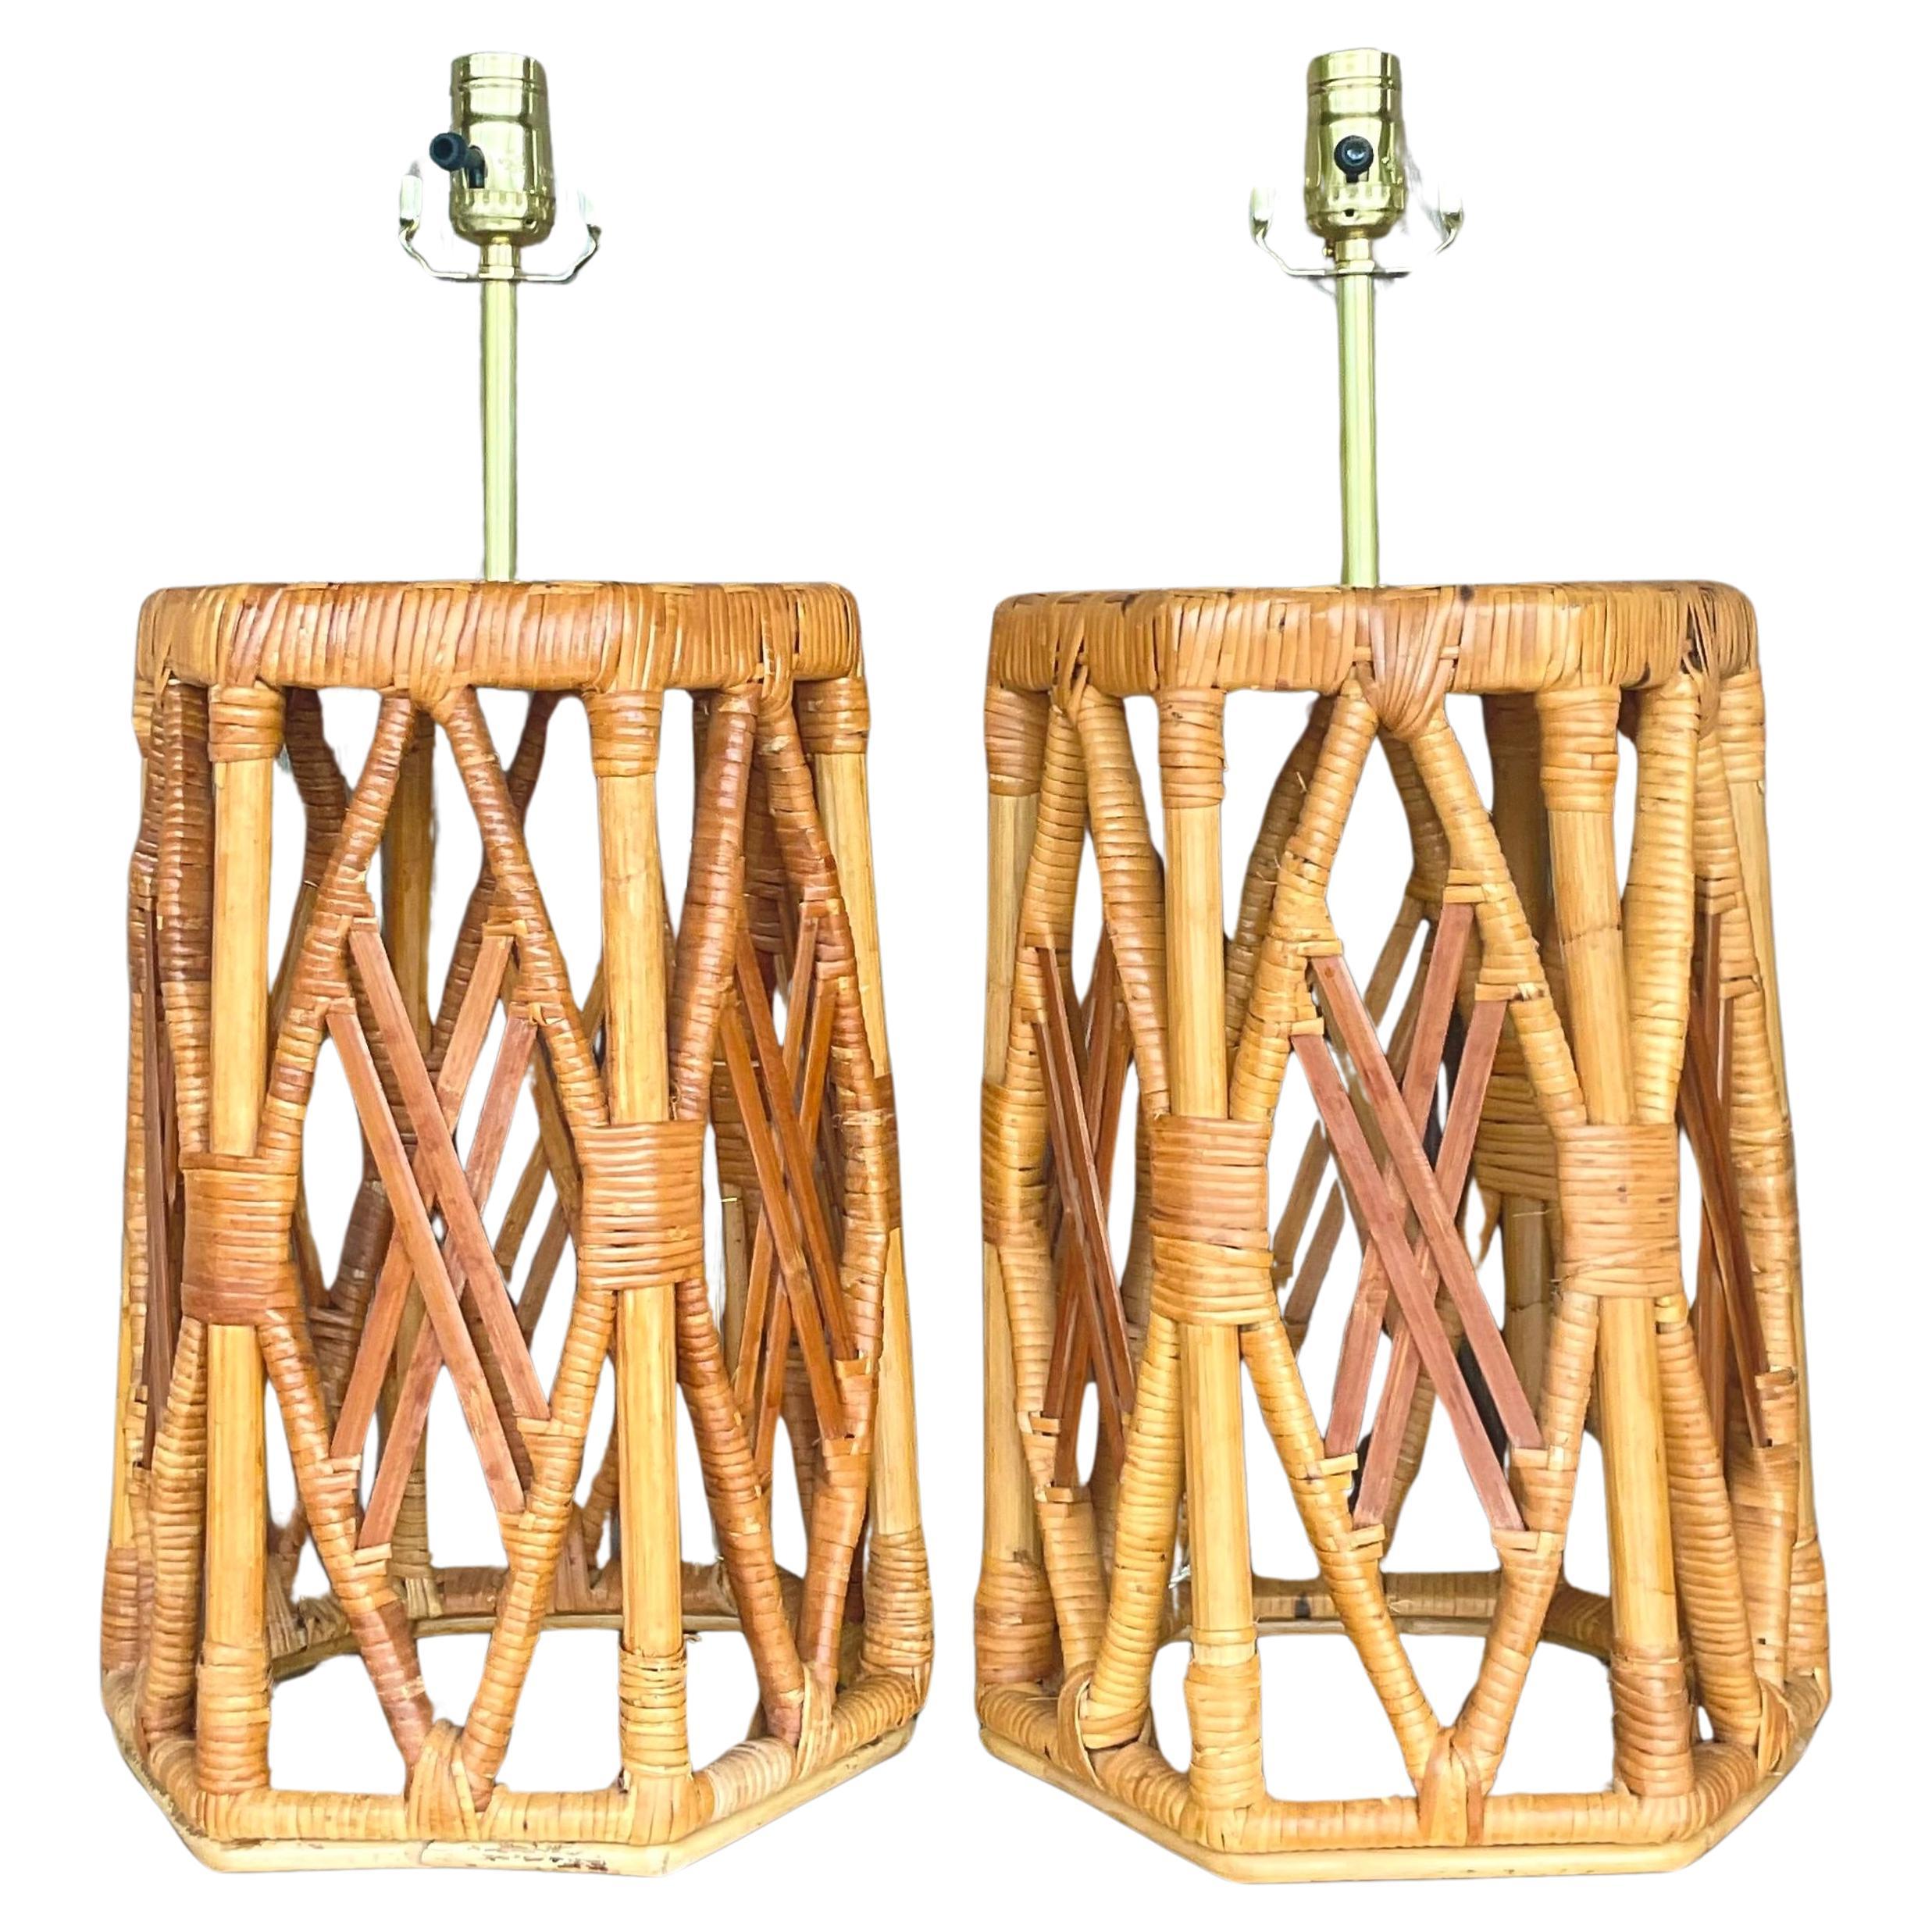 Vintage Coastal Wrapped Rattan Lamps - a Pair For Sale